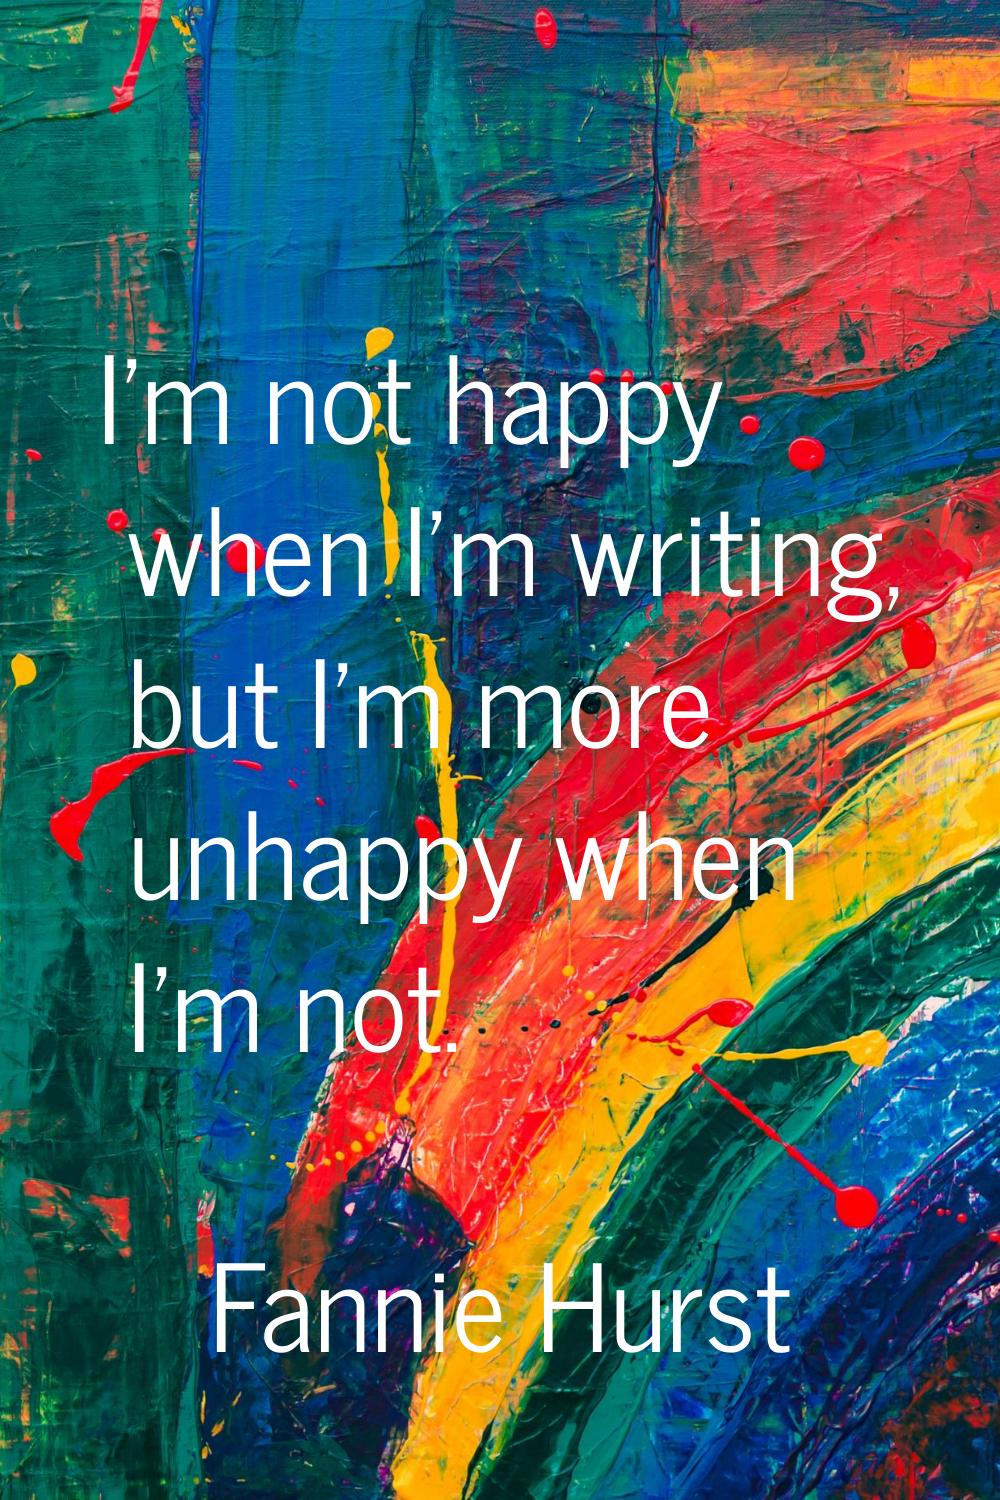 I'm not happy when I'm writing, but I'm more unhappy when I'm not.